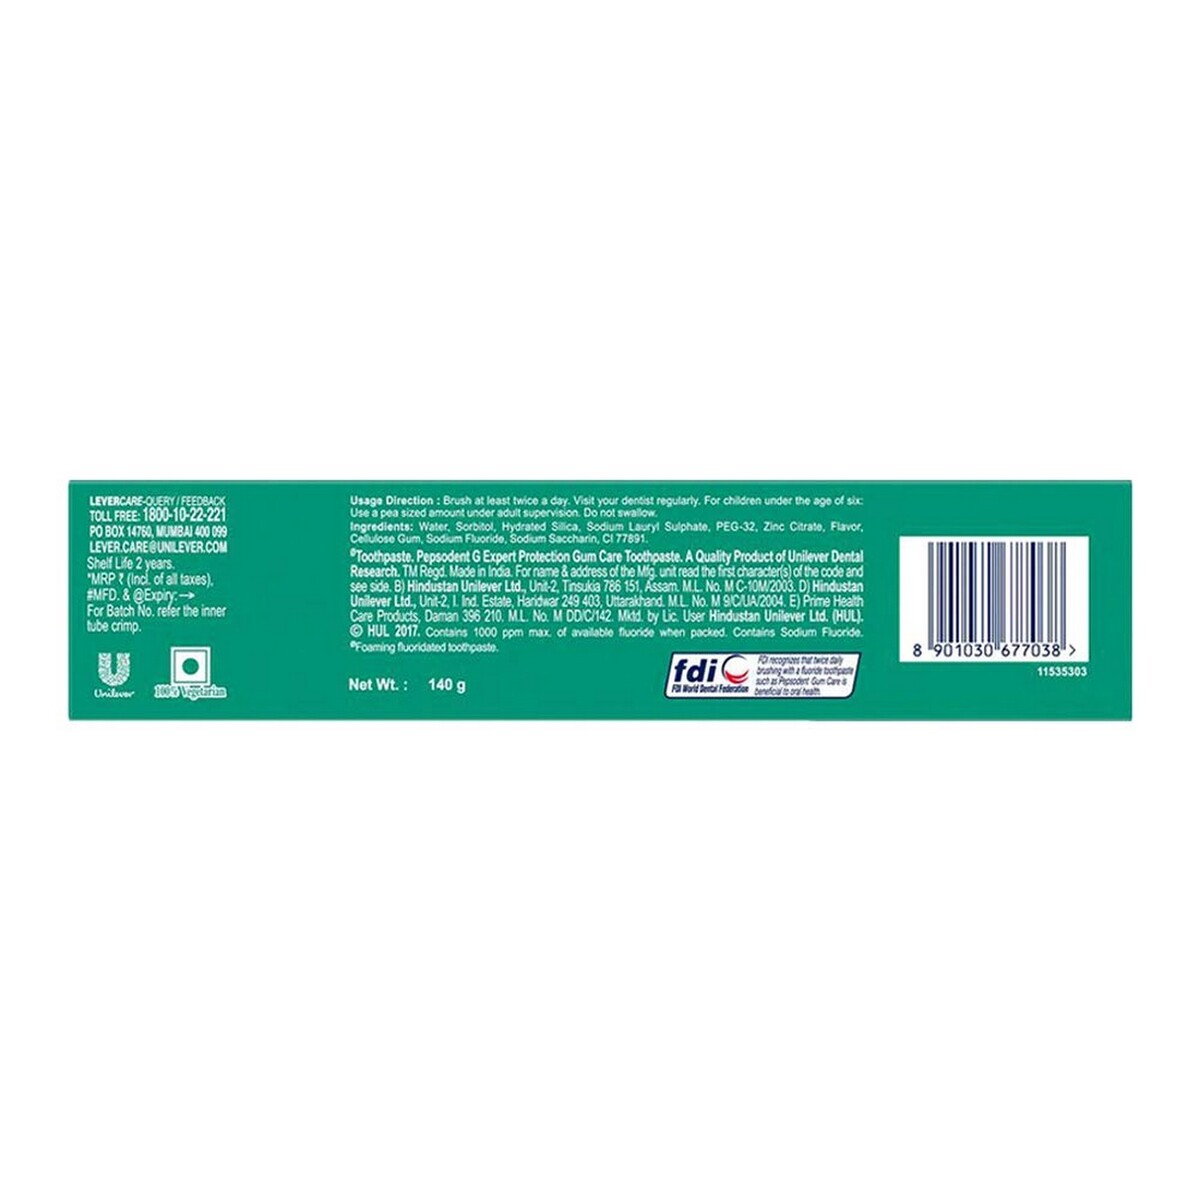 Pepsodent  Tooth Paste Gum Care 140g